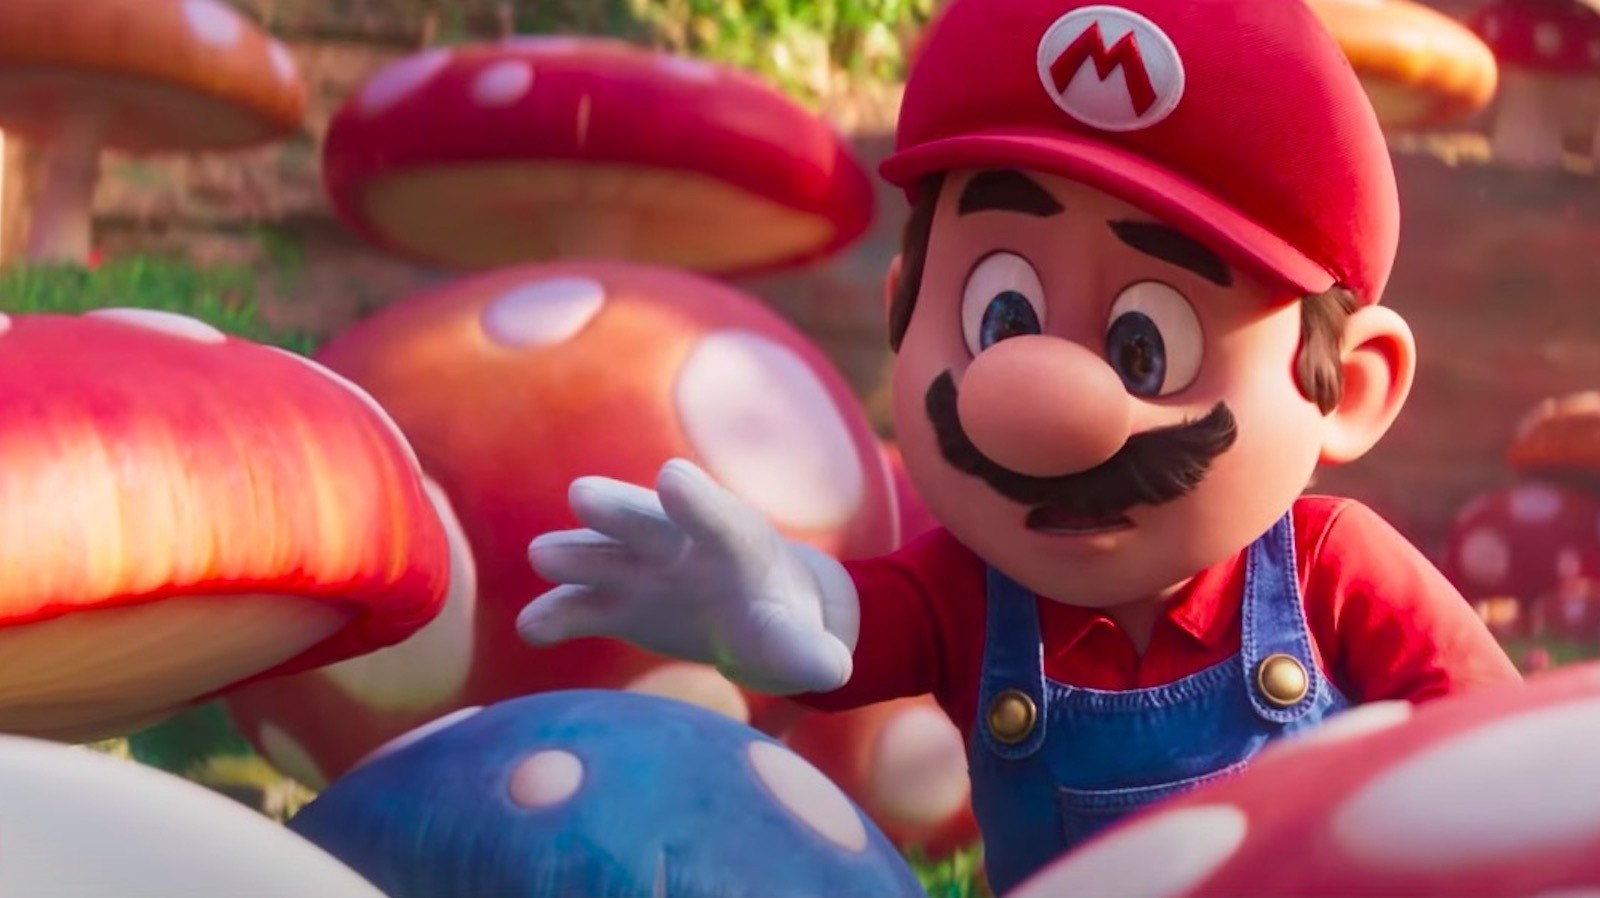 Super Mario Bros. Movie Show Off the Mushroom Kingdom in New Clip at The Game Awards 2022